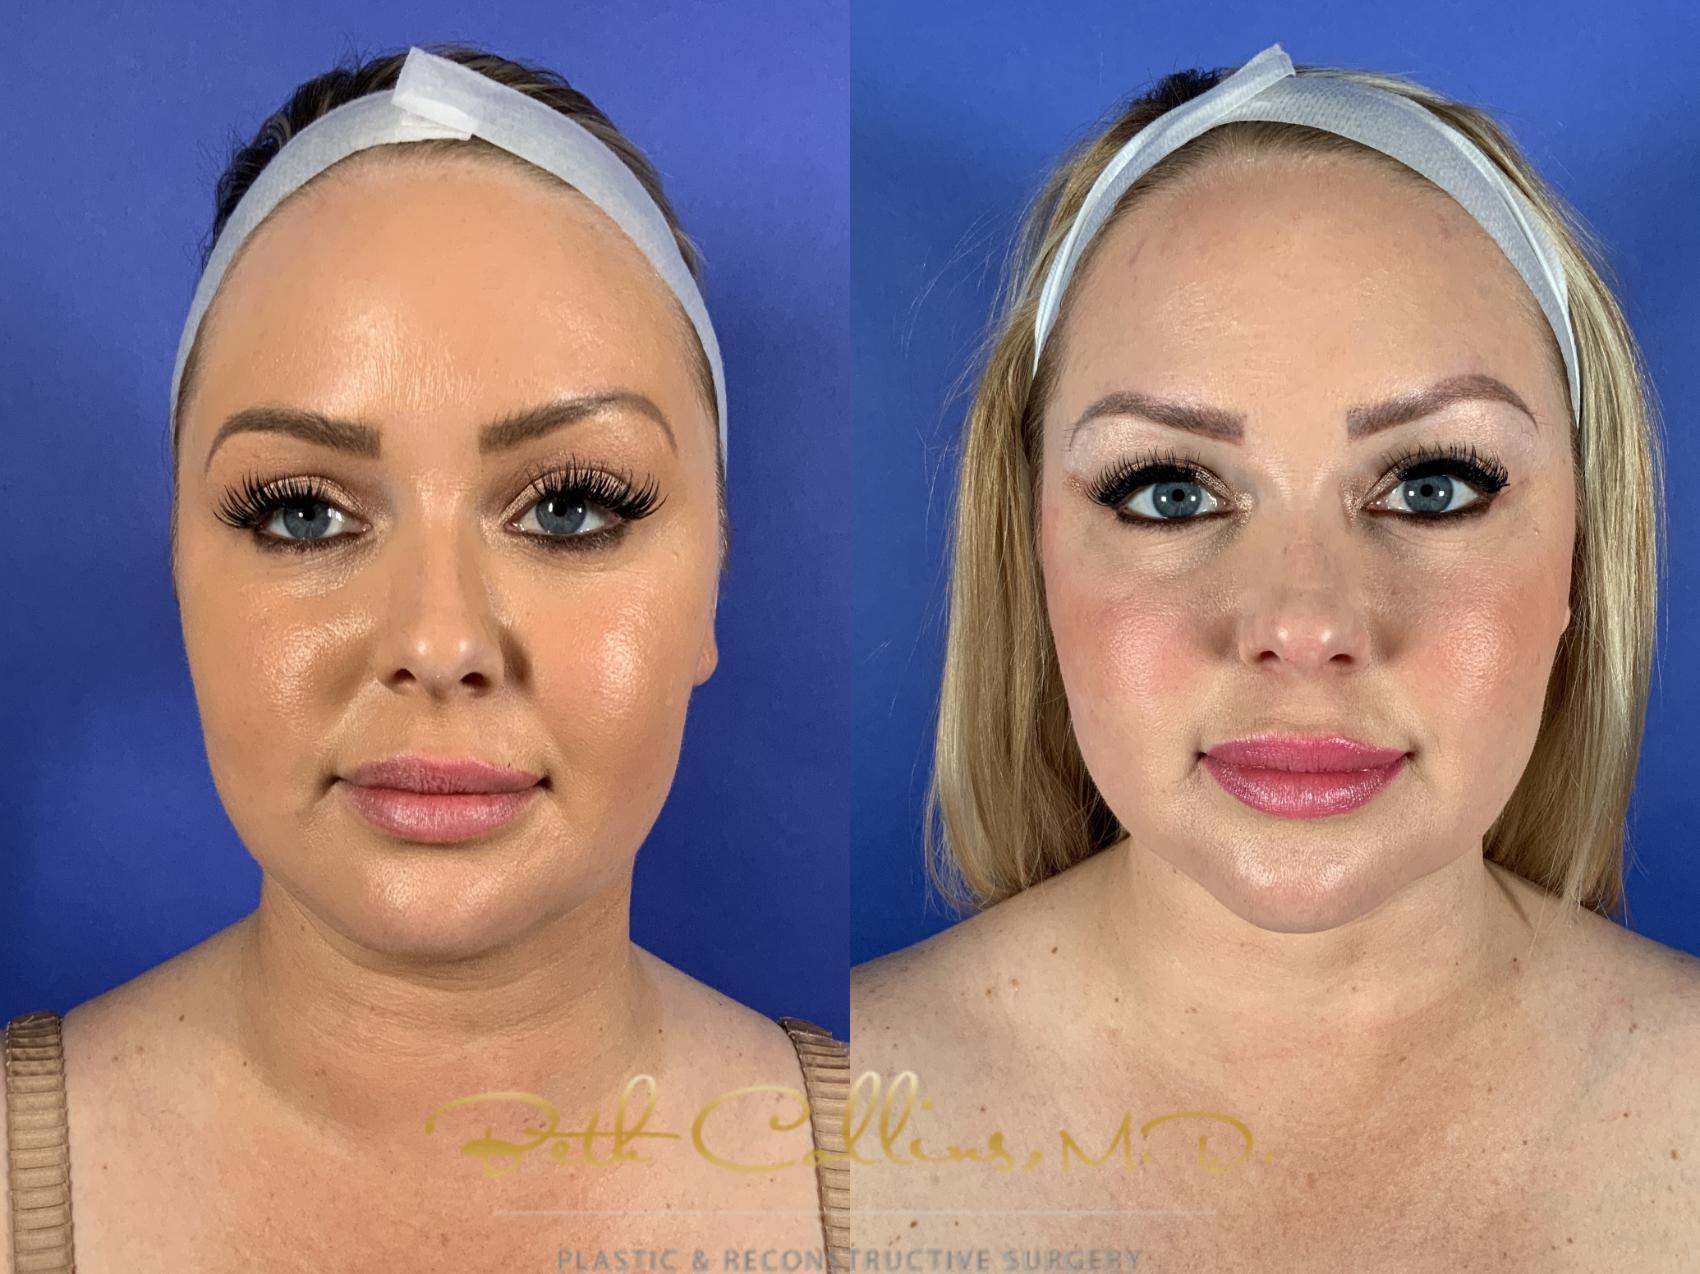 Chin and Neck Liposuction